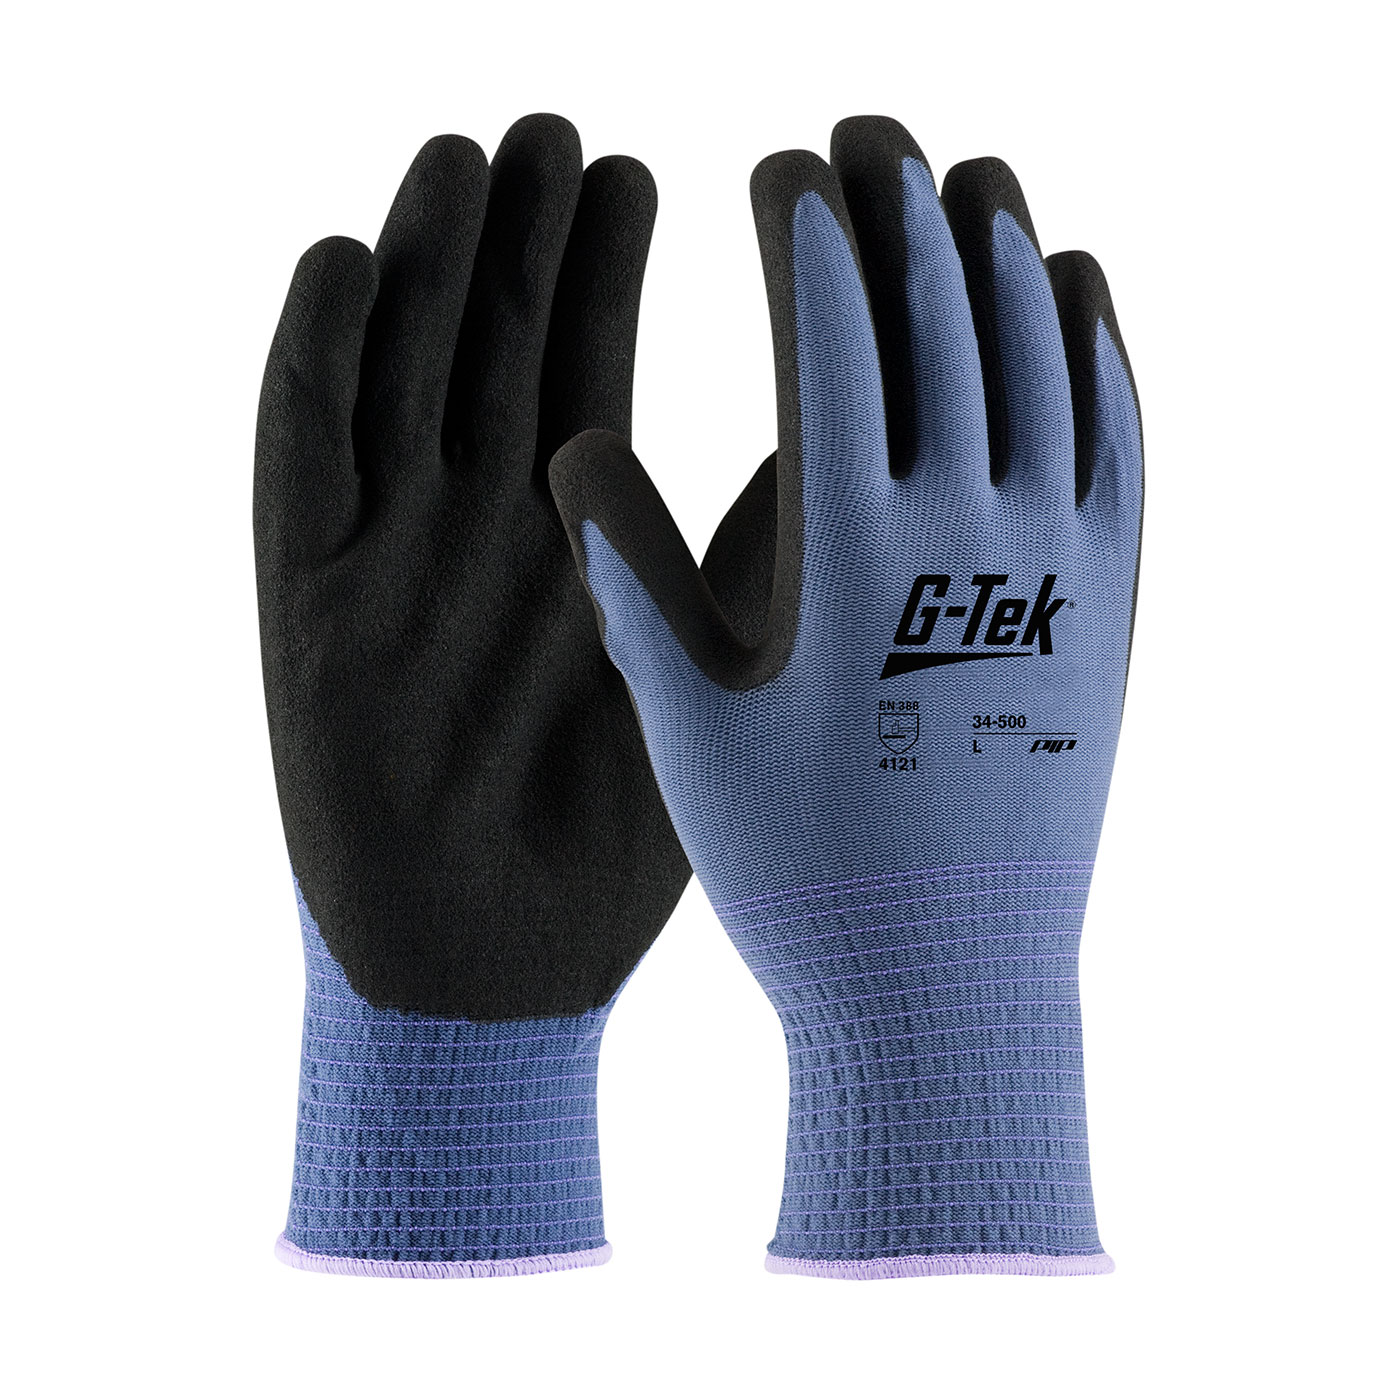 PIP 34-500/XL G-Tek GP Seamless Knit Nylon Glove with Nitrile Coated MicroSurface Grip on Palm & Fingers - 13 Gauge - X-Large PID-34 500 XL